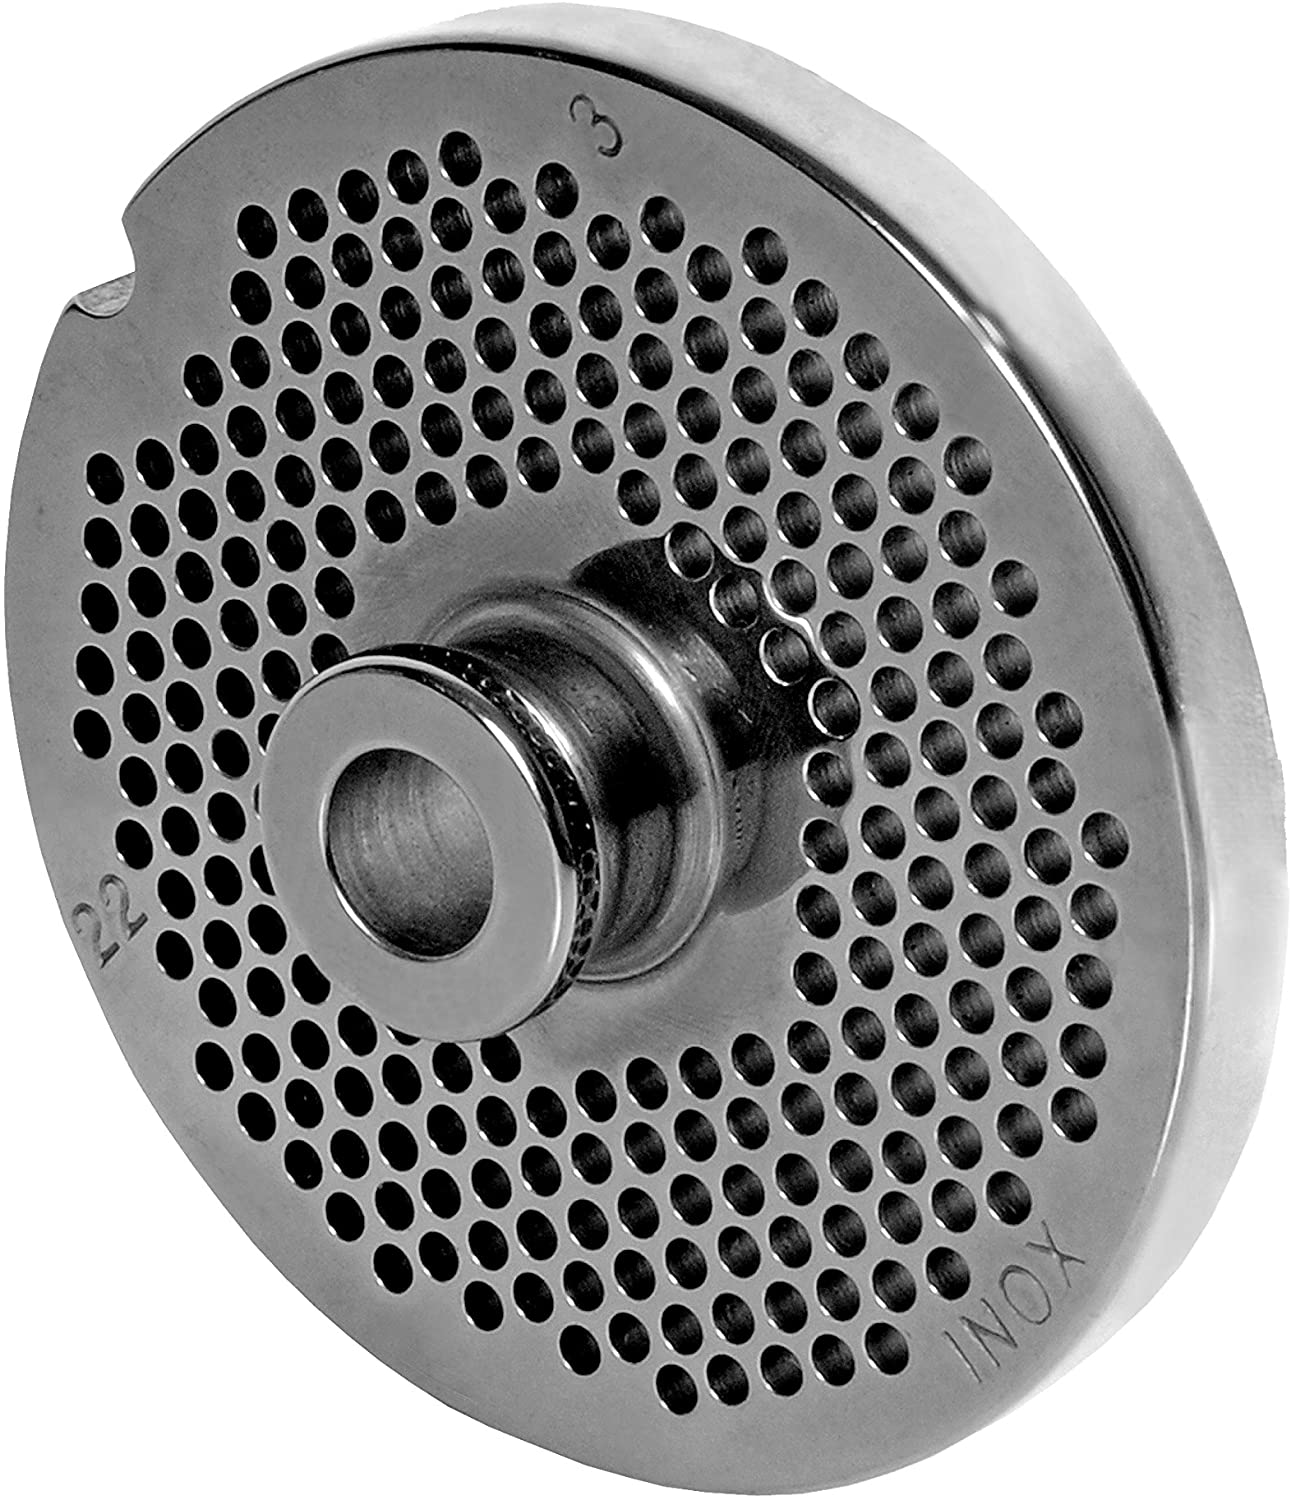 WolfCut INOX Perforated Disc with Hub Size 22 - 3.0 mm Bore - Compatible with Mincer Size 22